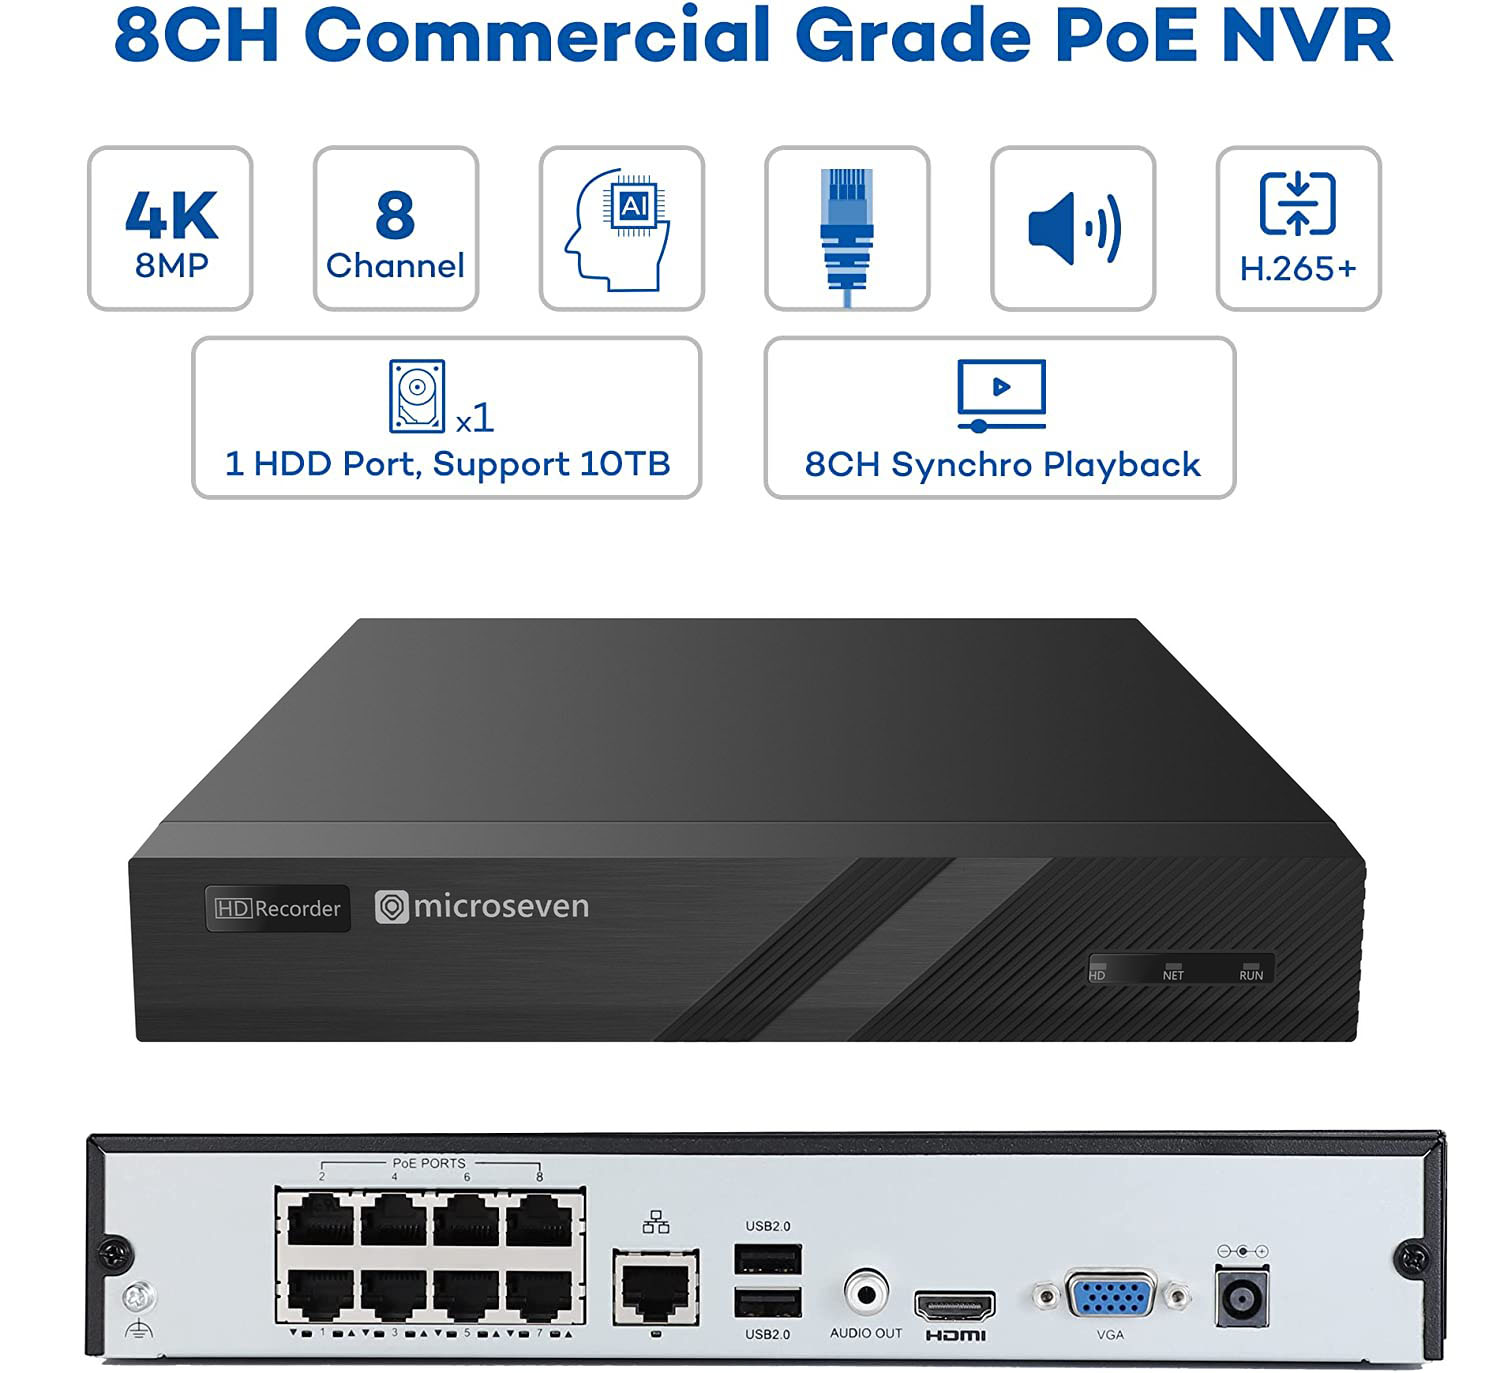 Microseven 4k 8 Channel 8 Port PoE H.265 Network Video Recorder NVR for Security Camera (8CH 1080P/3MP/4MP/5MP/6MP/4K) Supports up to 8 x 8-Megapixel IP Cameras, Max. 10TB HDD 1x SATA(Not Included) 1 VGA, 1 HDMI, 8 PoE Ports, Support All Microseven Cameras